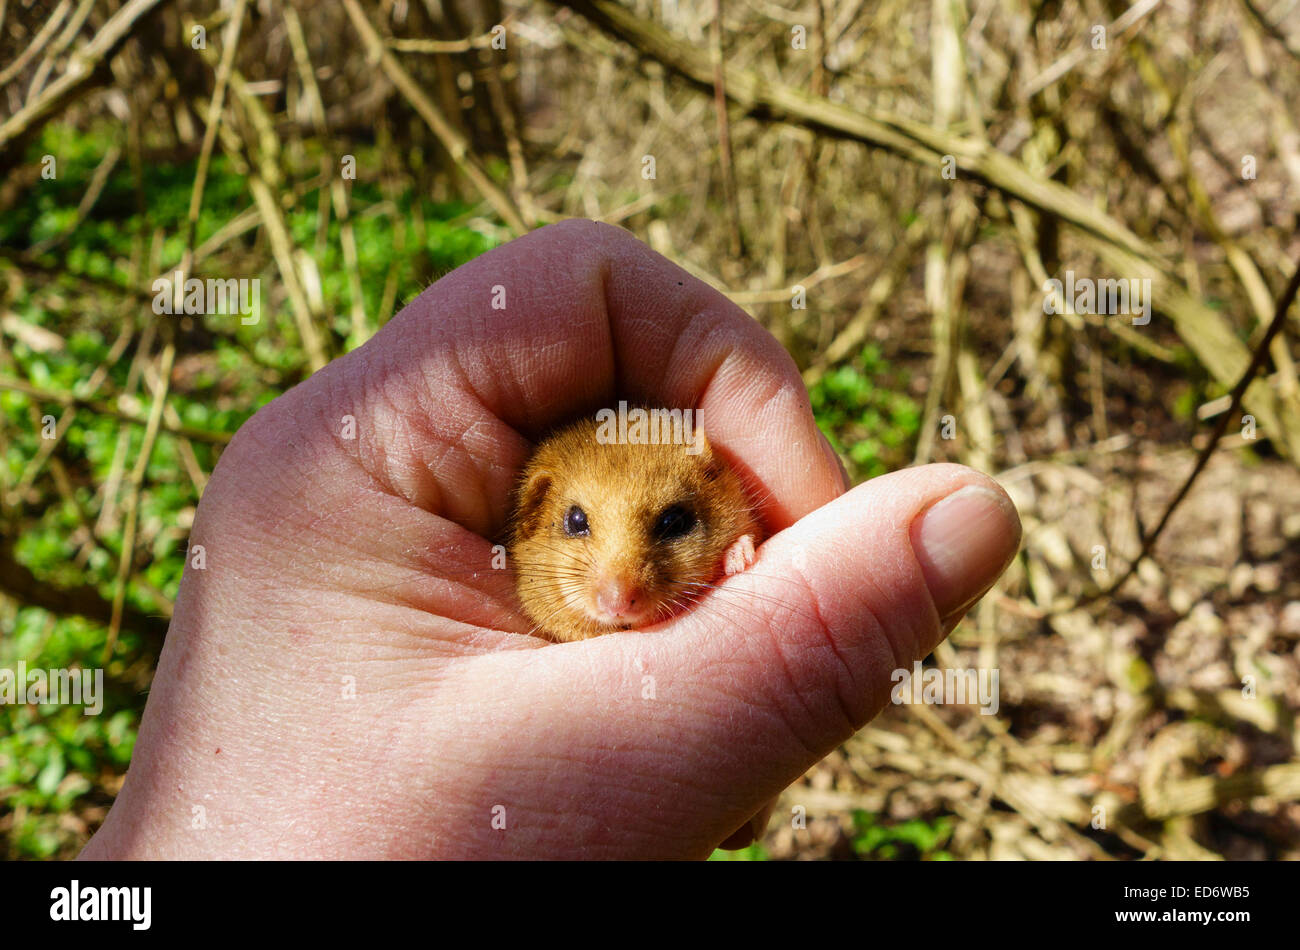 Dormouse (Muscardinus avellanarius) monitoring being carried out on a Nature reserve in the Herefordshire UK countryside Stock Photo